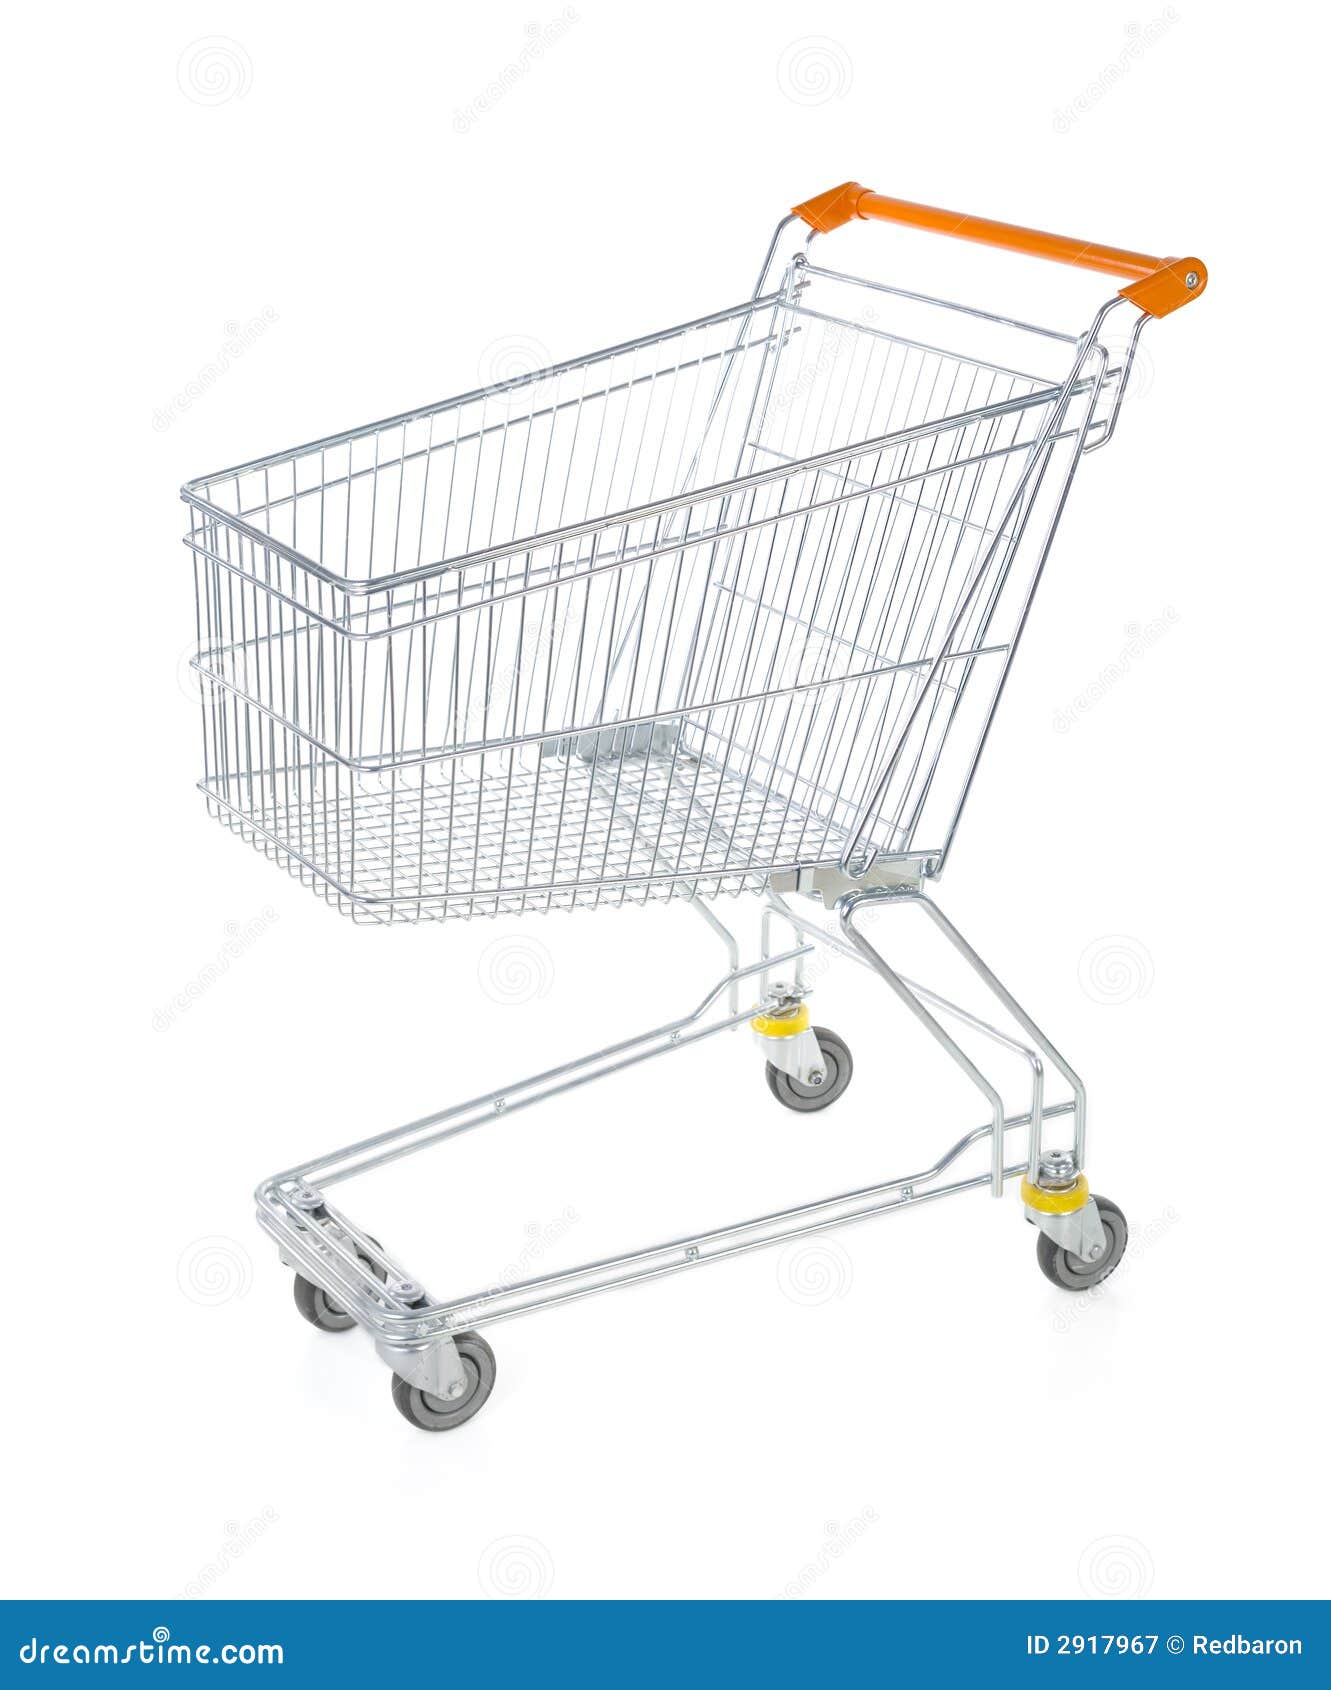 Trolley stock image. Image of shop, standing, object, store - 2917967